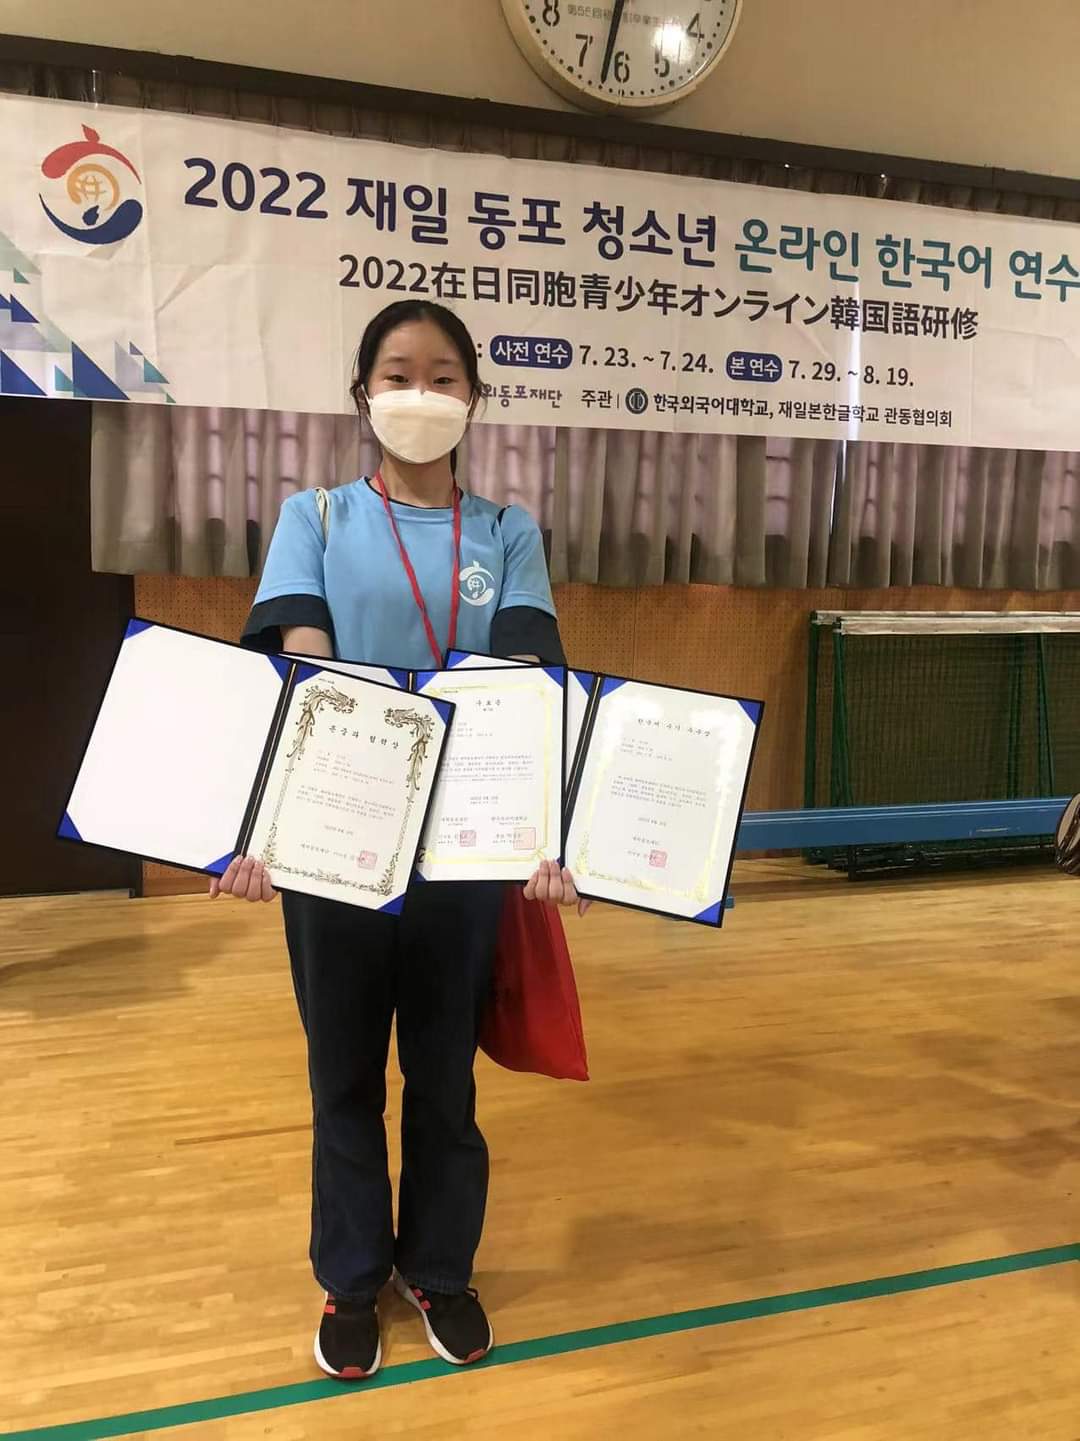 A trainee receiving a certificate of completion at Tokyo Korean School's graduation ceremony